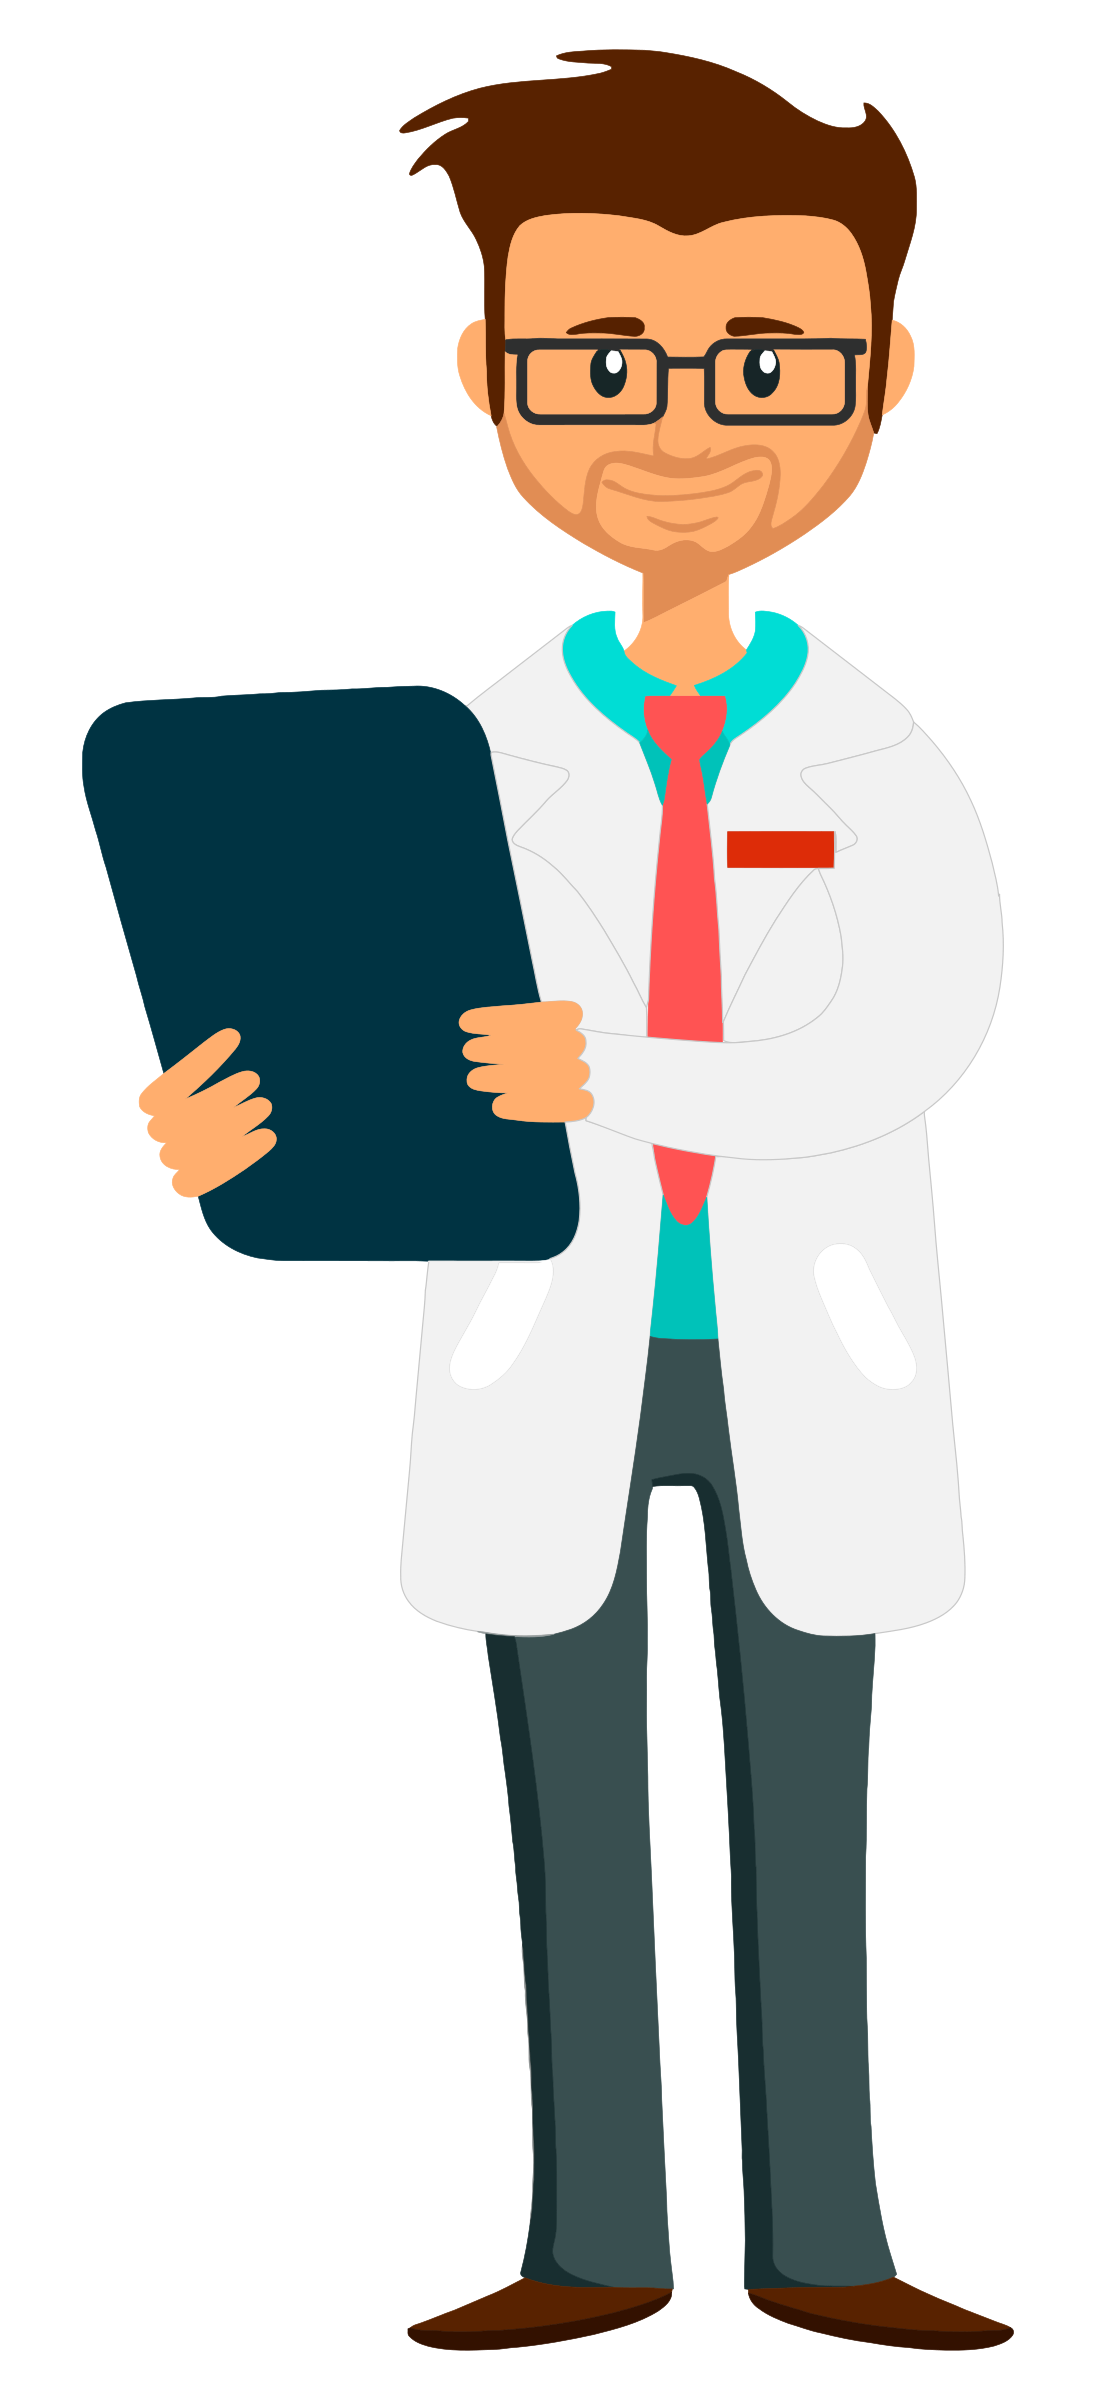 Clipboard clipart two person. Doctor holding fixed arm